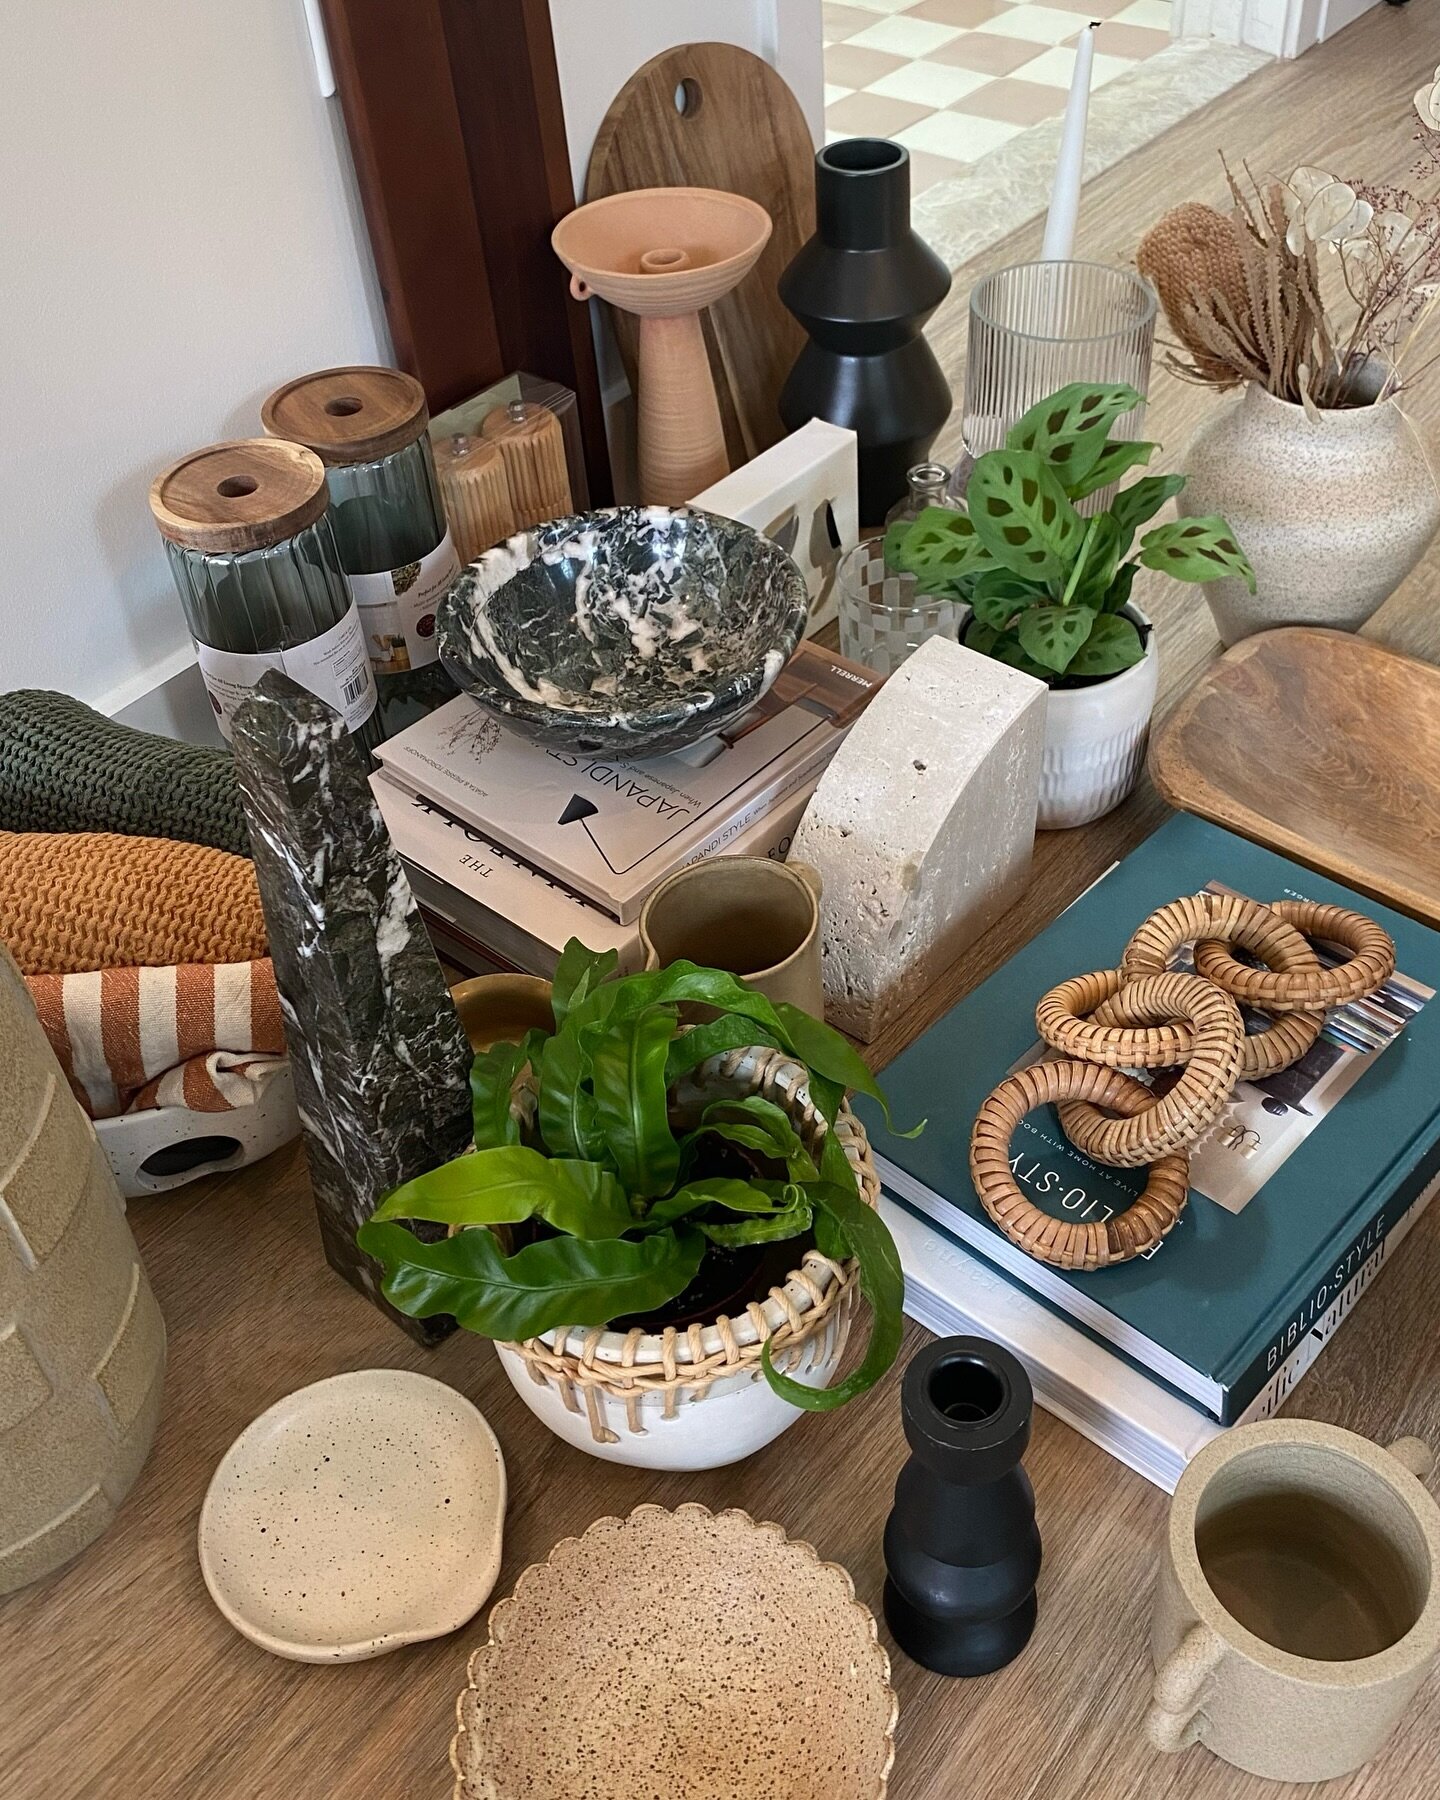 Prepping all the things for next week&rsquo;s photoshoot for Project #StayInMtWashington with the best in the biz @charlotteleaphotography 
.
.
.
#StayInteriors #InteriorStyling #InteriorDesign #CurrentDesignSituation #InteriorLovers #CaliforniaCasua